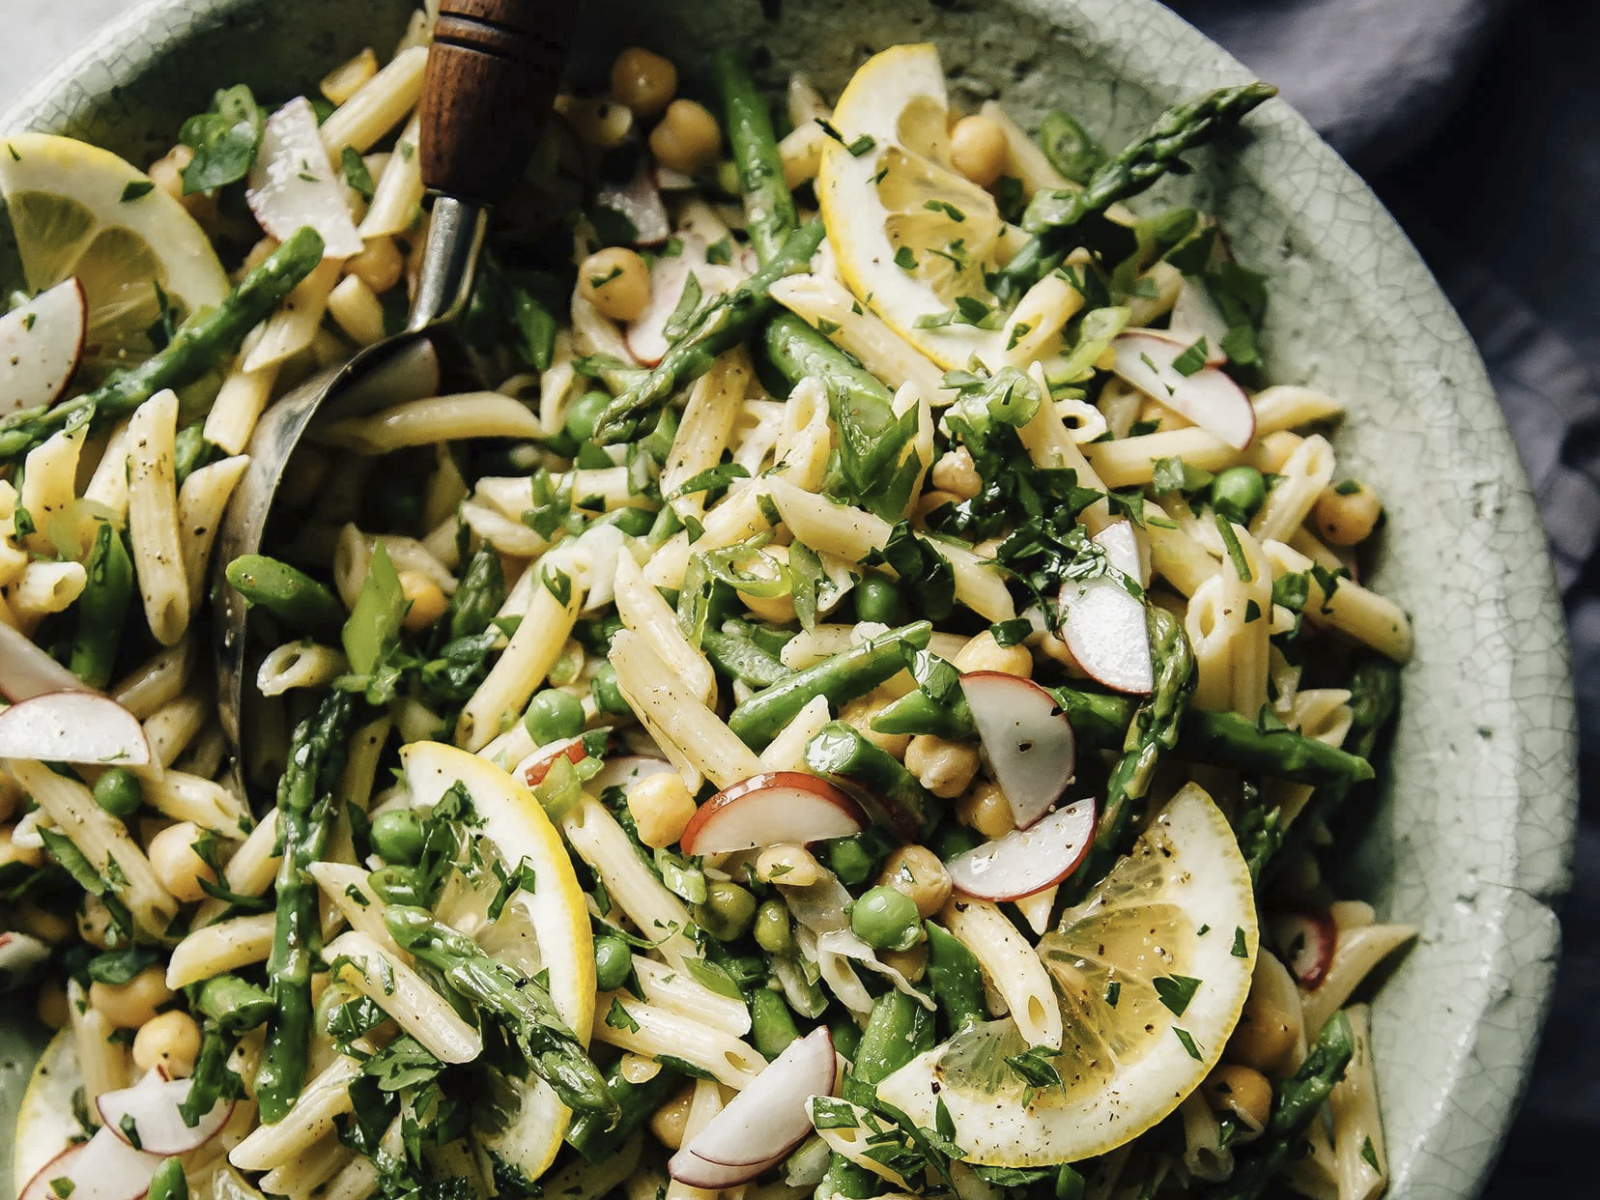 Lemony Spring Pasta Salad with Vegetables and Herbs